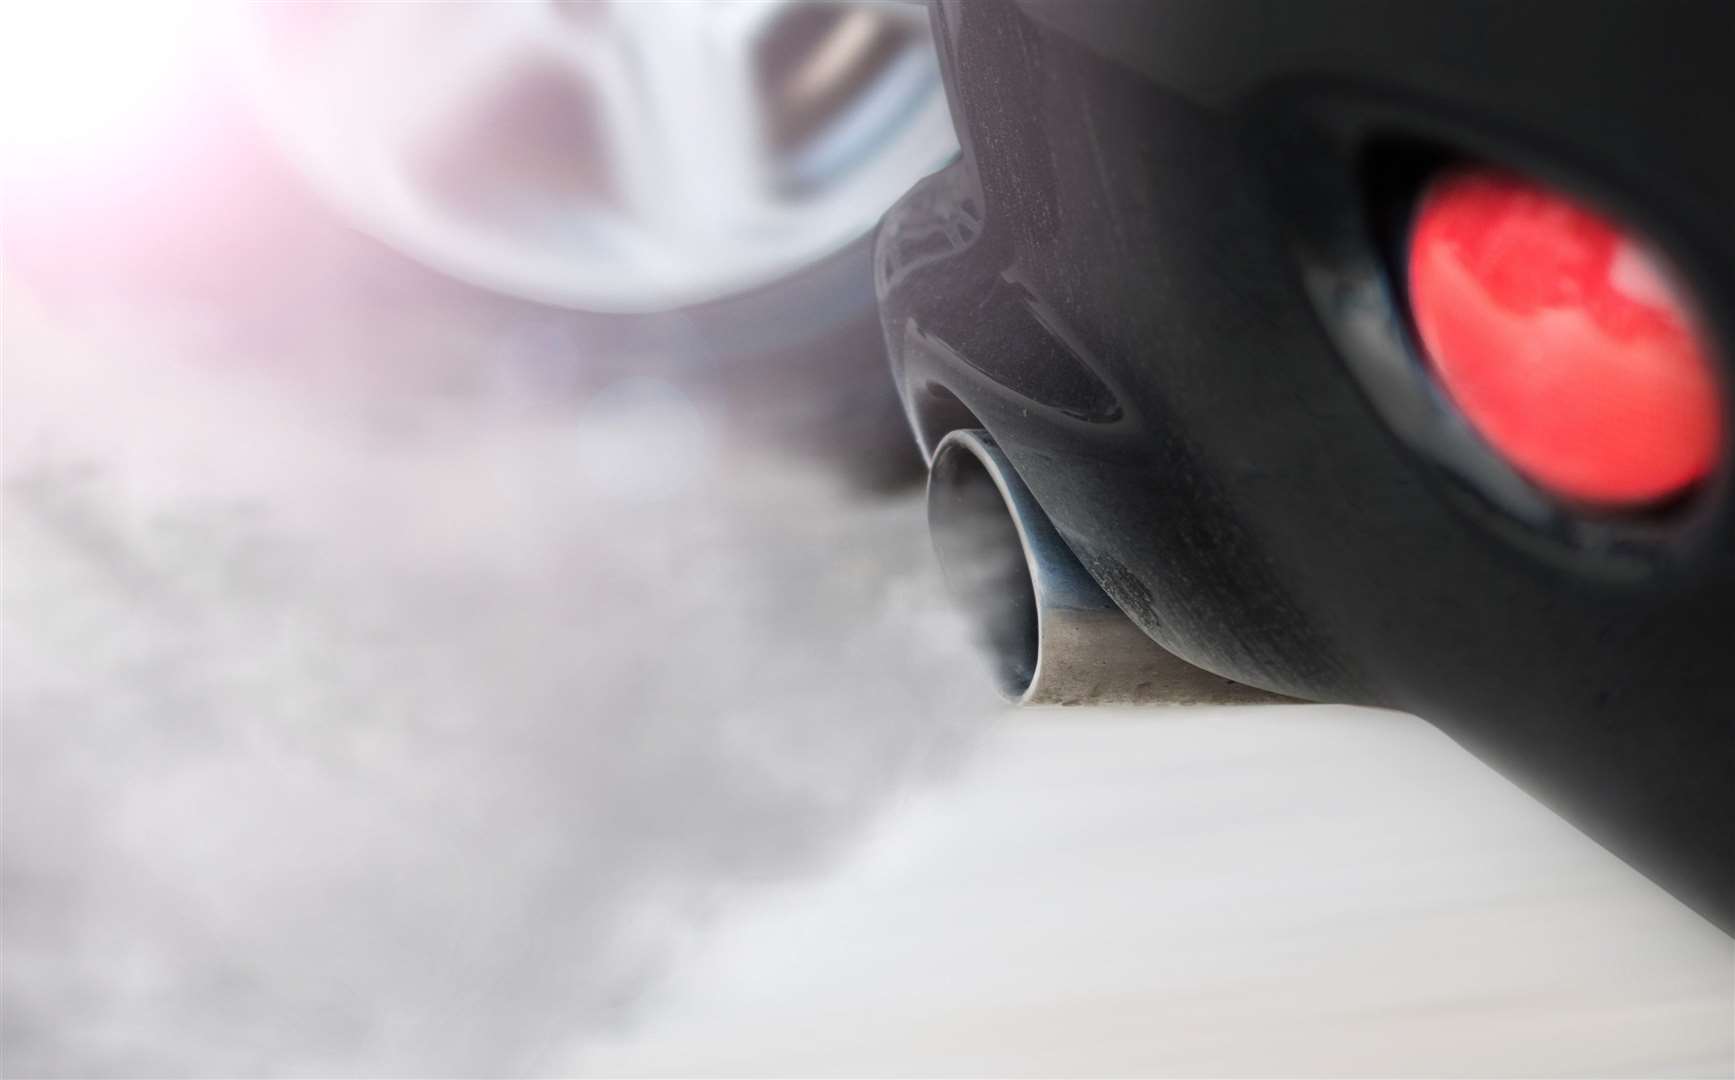 The consultation will also look at how testers can check emissions. Image: iStock.